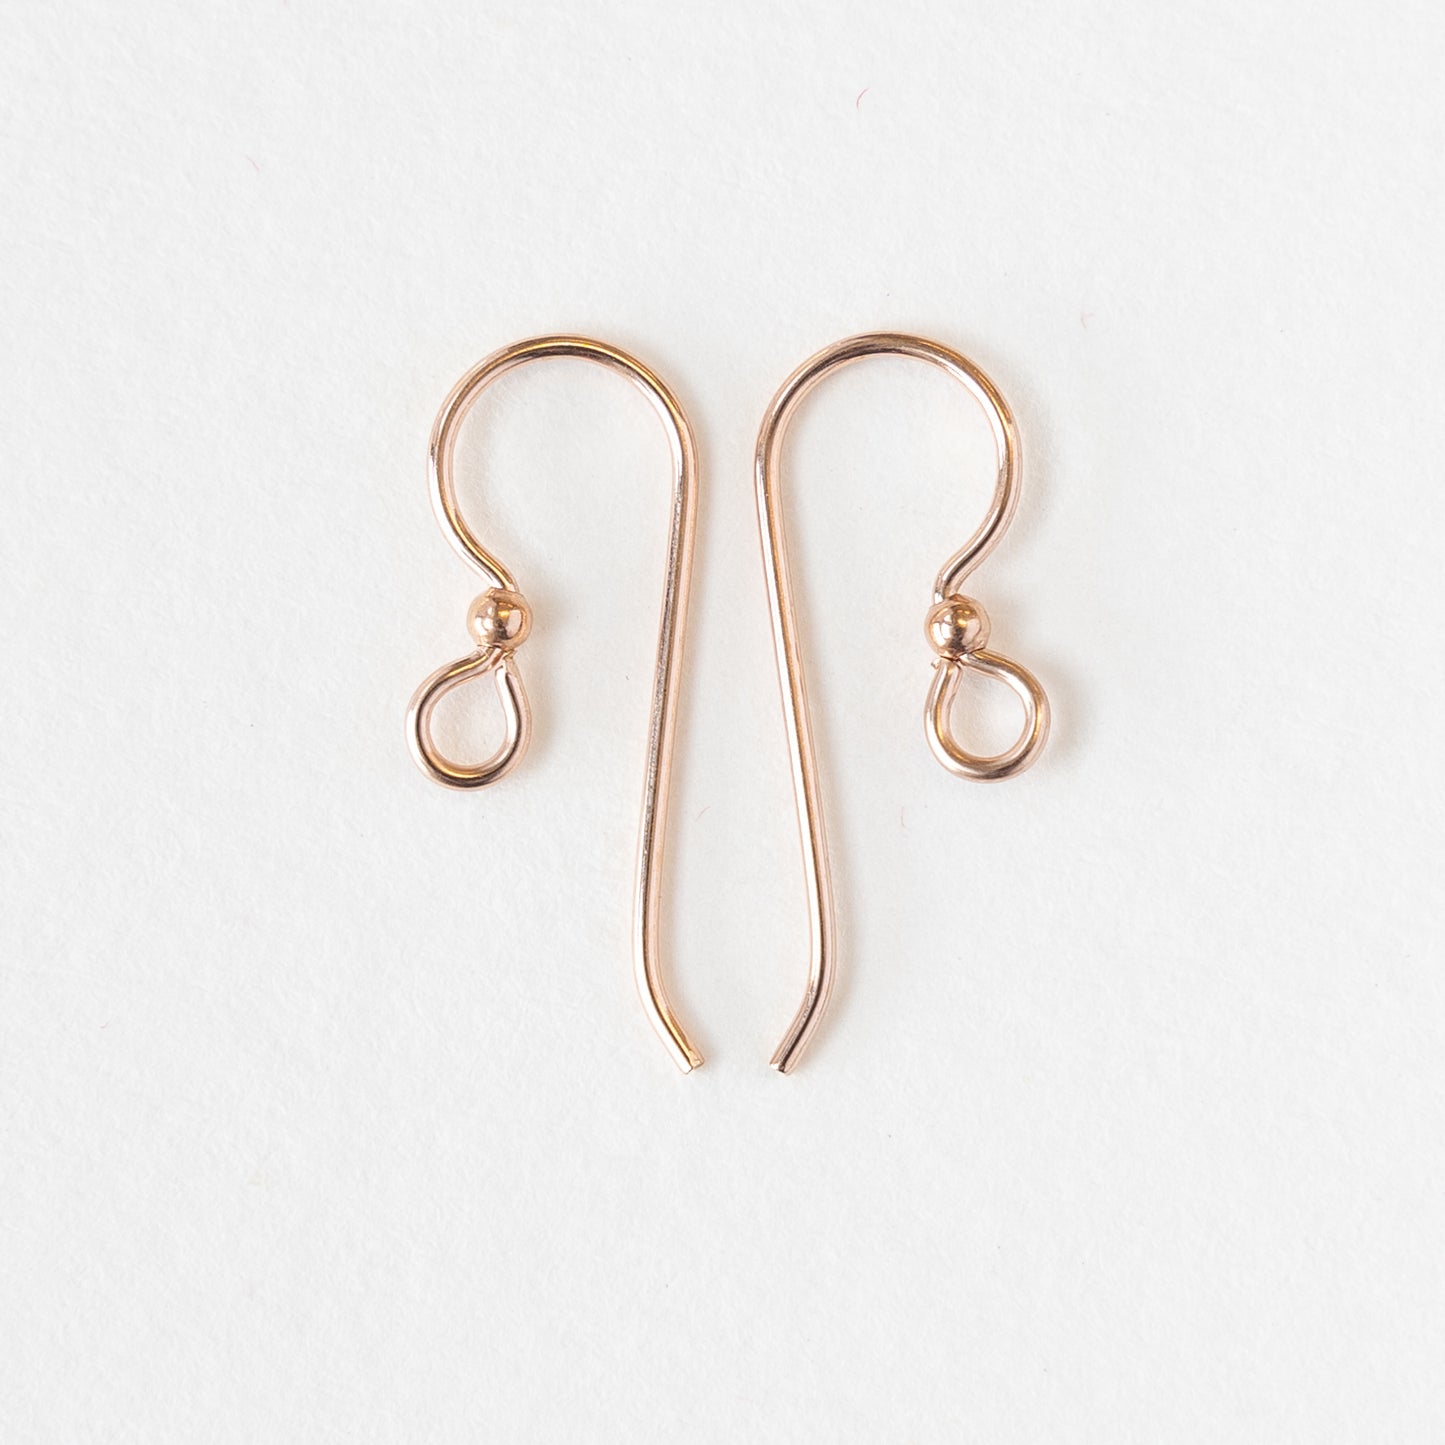 20g Rose Gold Filled Ear Wire with 2mm Ball